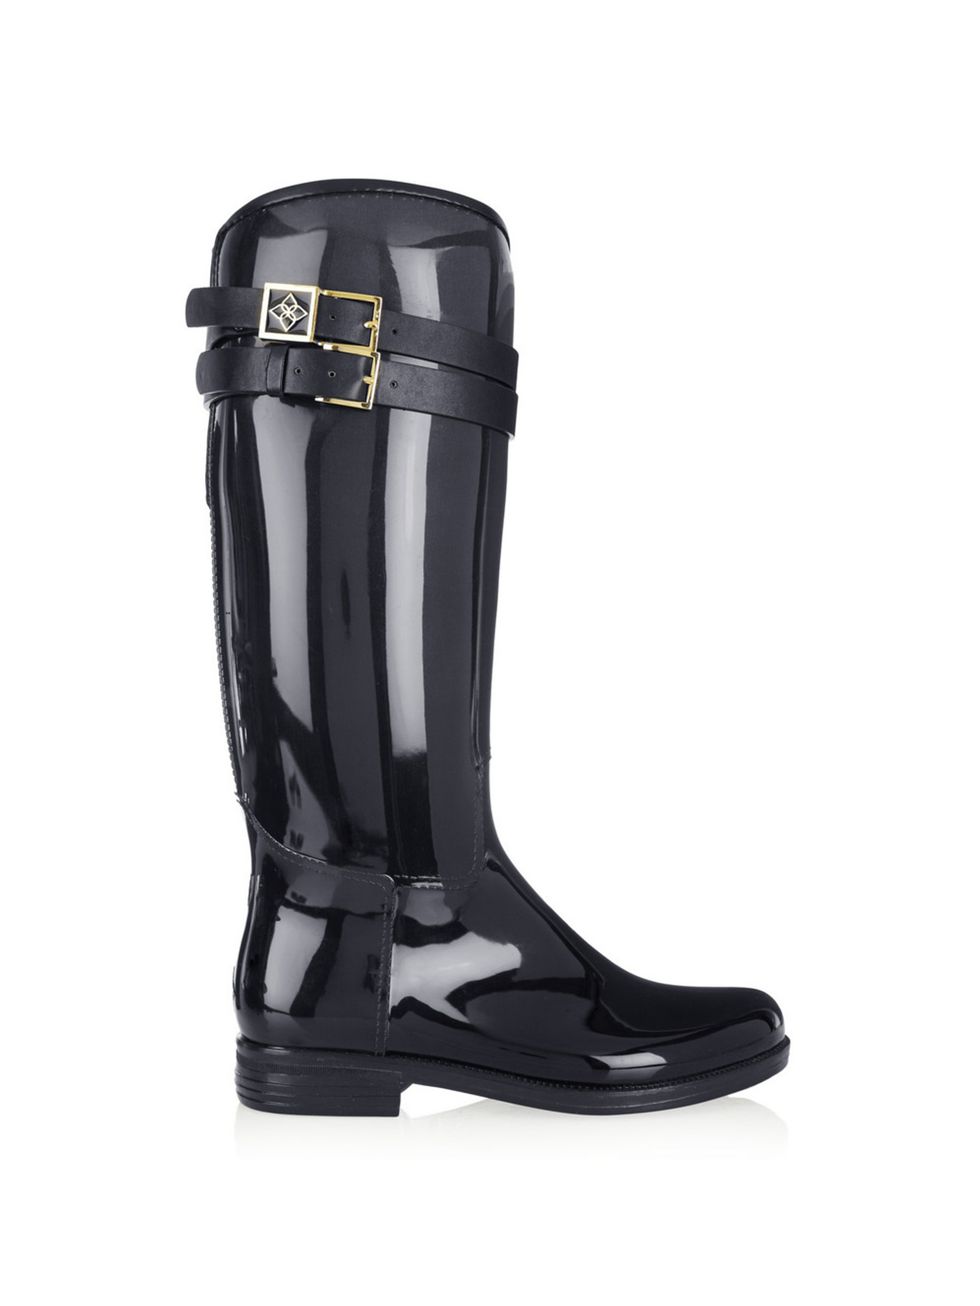 Boot, Riding boot, Knee-high boot, Leather, Steel-toe boot, Rain boot, Motorcycle boot, Work boots, Buckle, Zipper, 